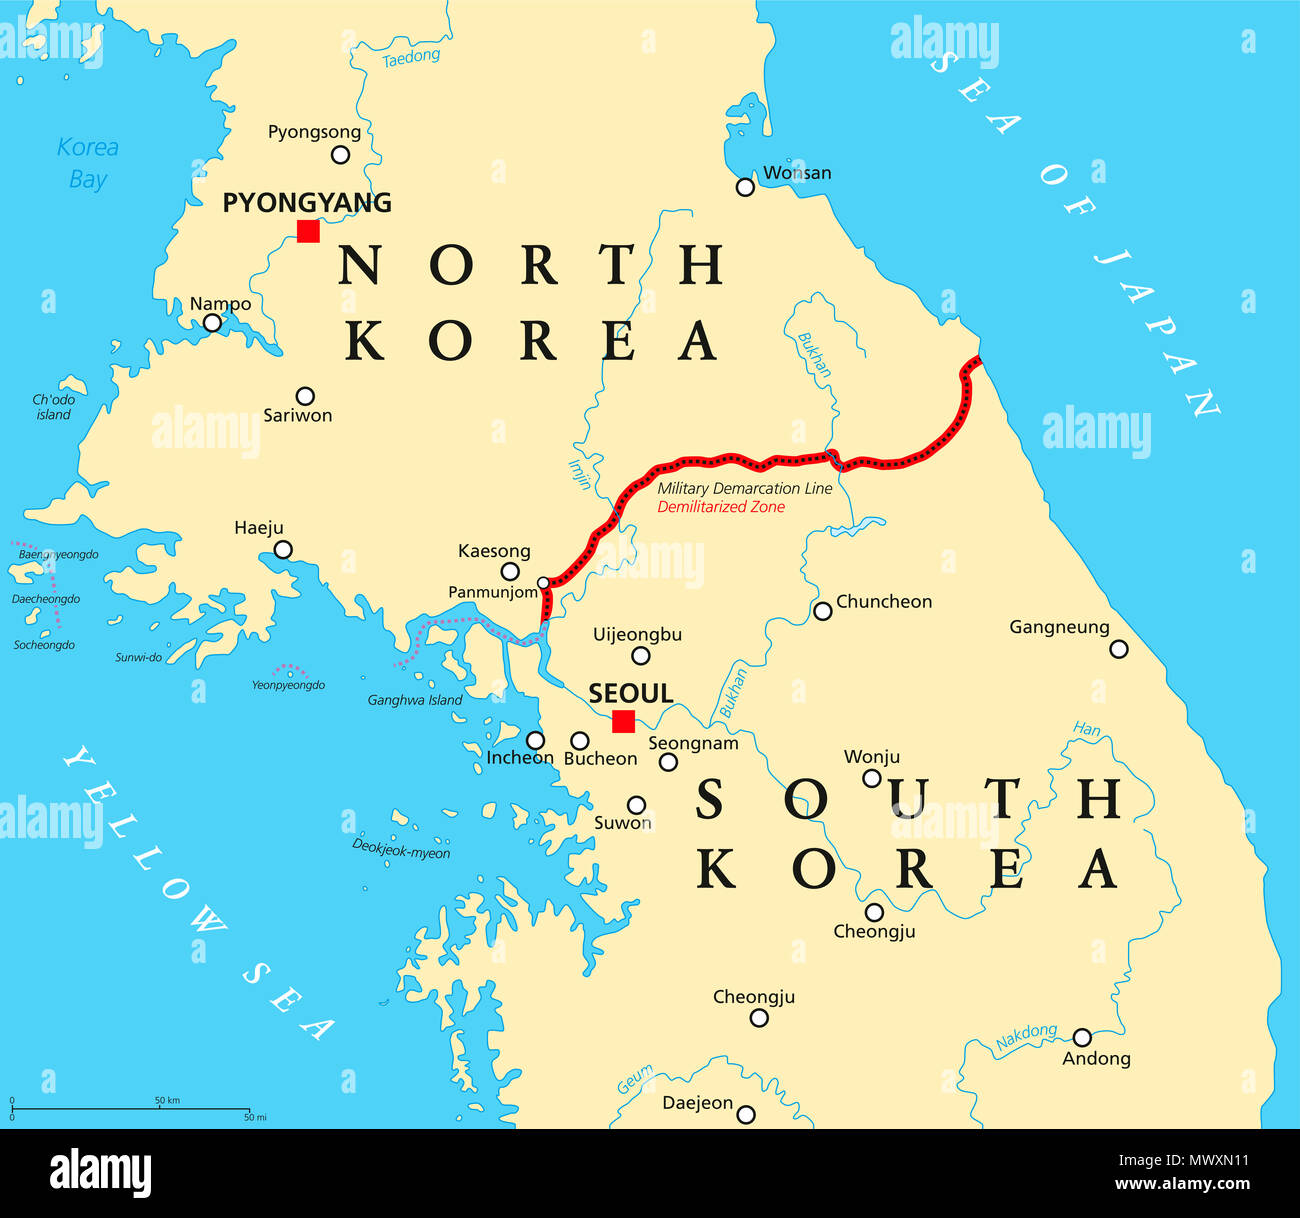 Korean Peninsula, Demilitarized Zone, political map. North and South Korea with Military Demarcation Line, capitals, borders, most important cities. Stock Photo